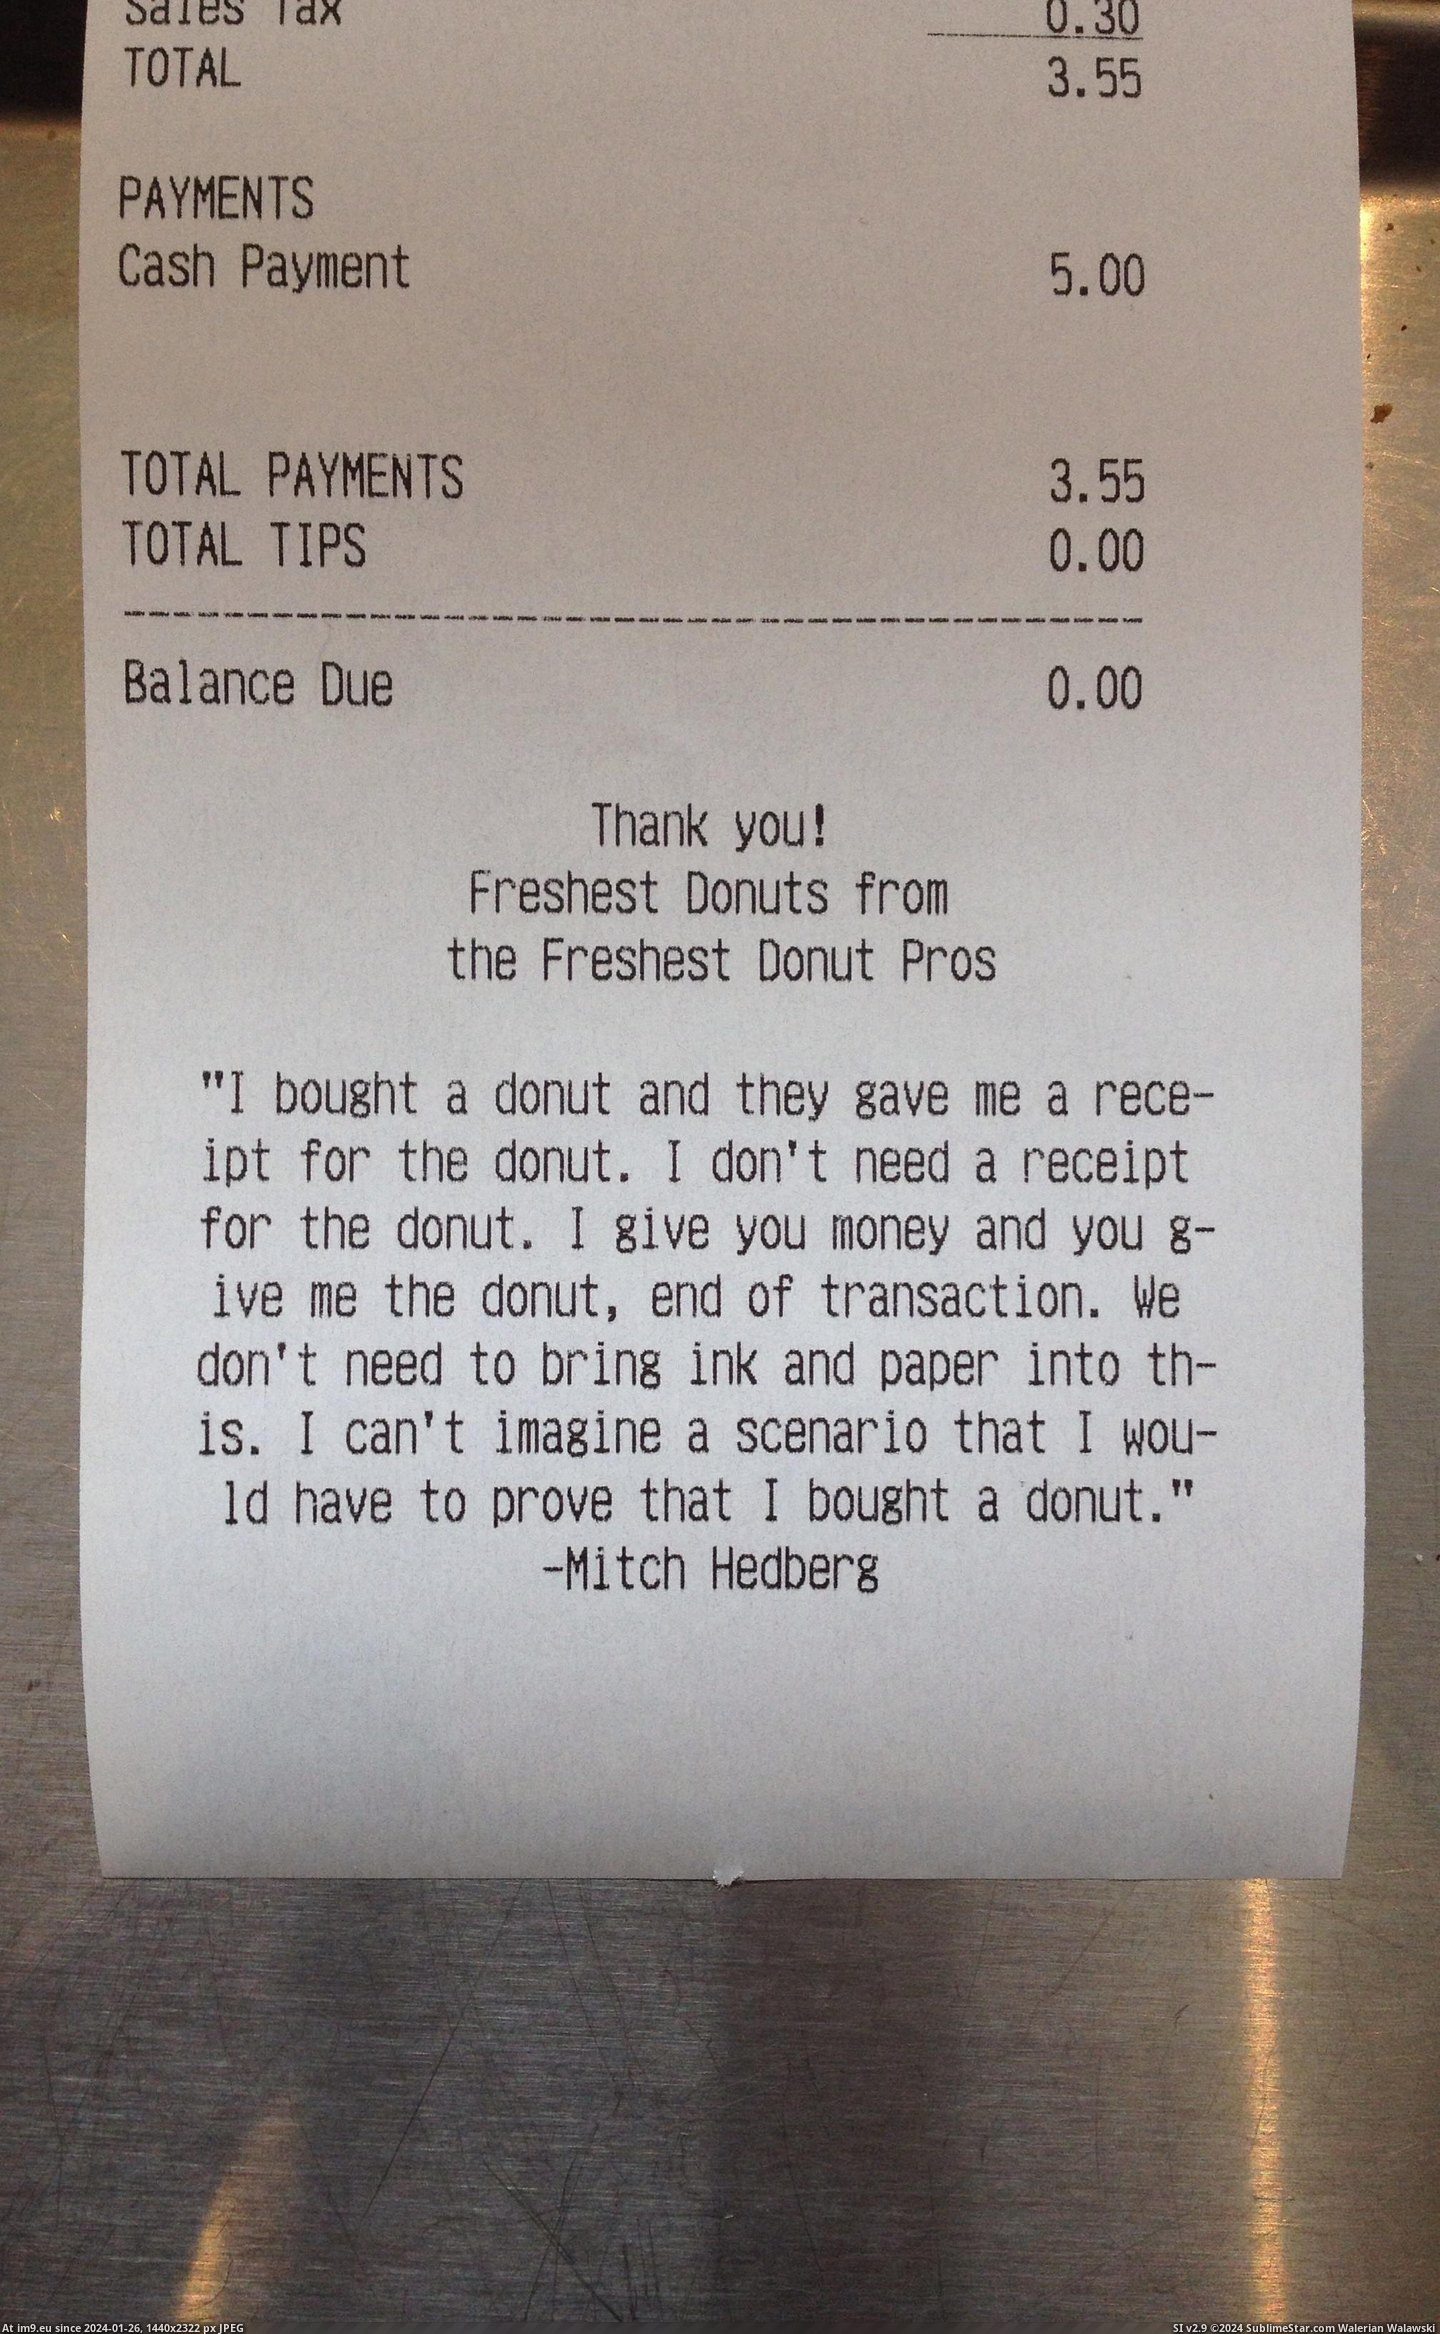 #Funny #Was #Work #Ability #Doughnut #Firs #Receipts #Shop #Control #Printed [Funny] I was given the ability to control what gets printed on the receipts at the doughnut shop where I work. This is the firs Pic. (Bild von album My r/FUNNY favs))